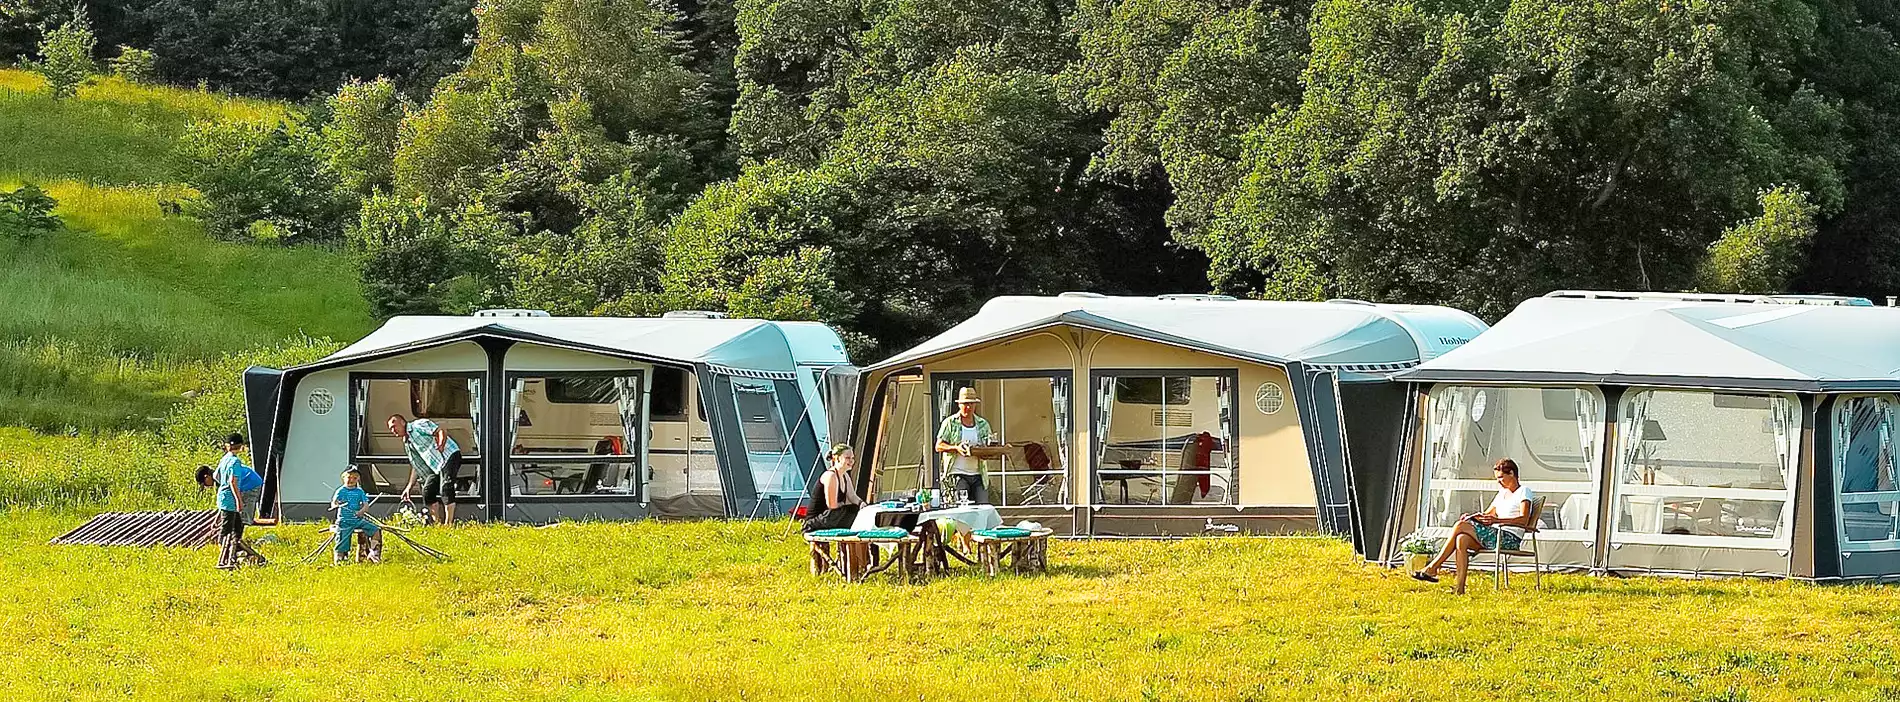 emplacement caravaning camping messanges